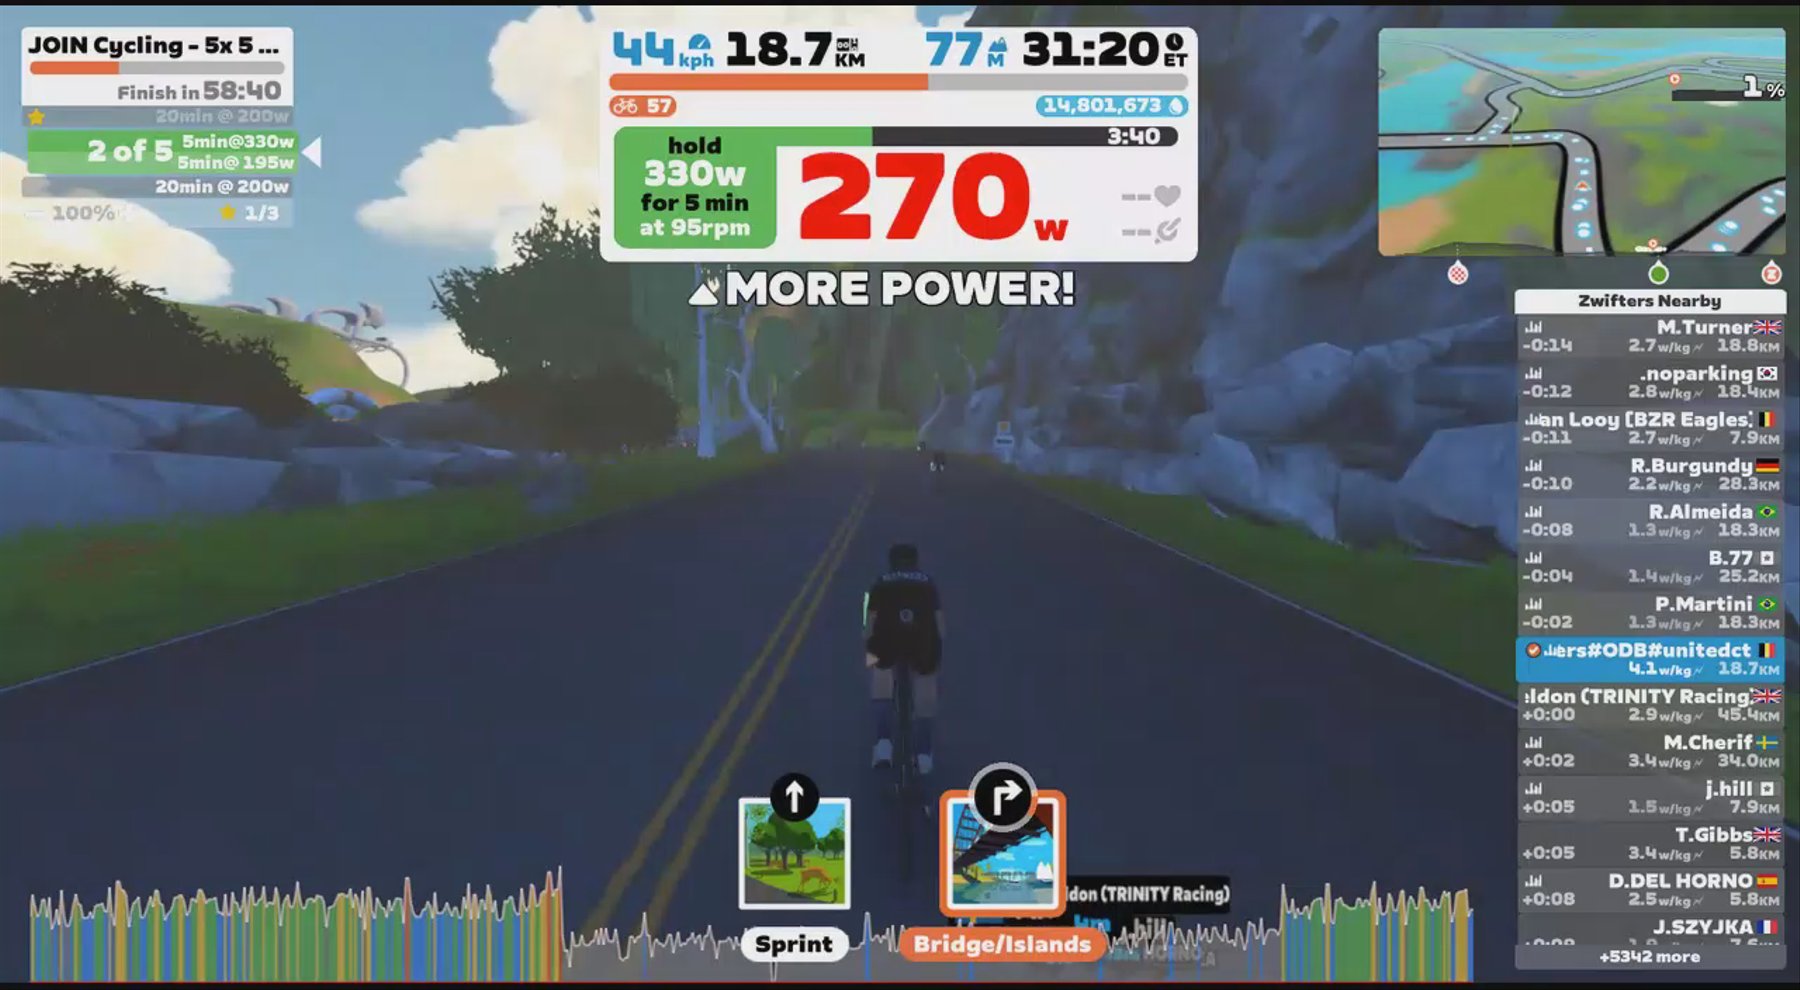 Zwift - JOIN Cycling - 5x 5 min omslagpunt (3) in Watopia